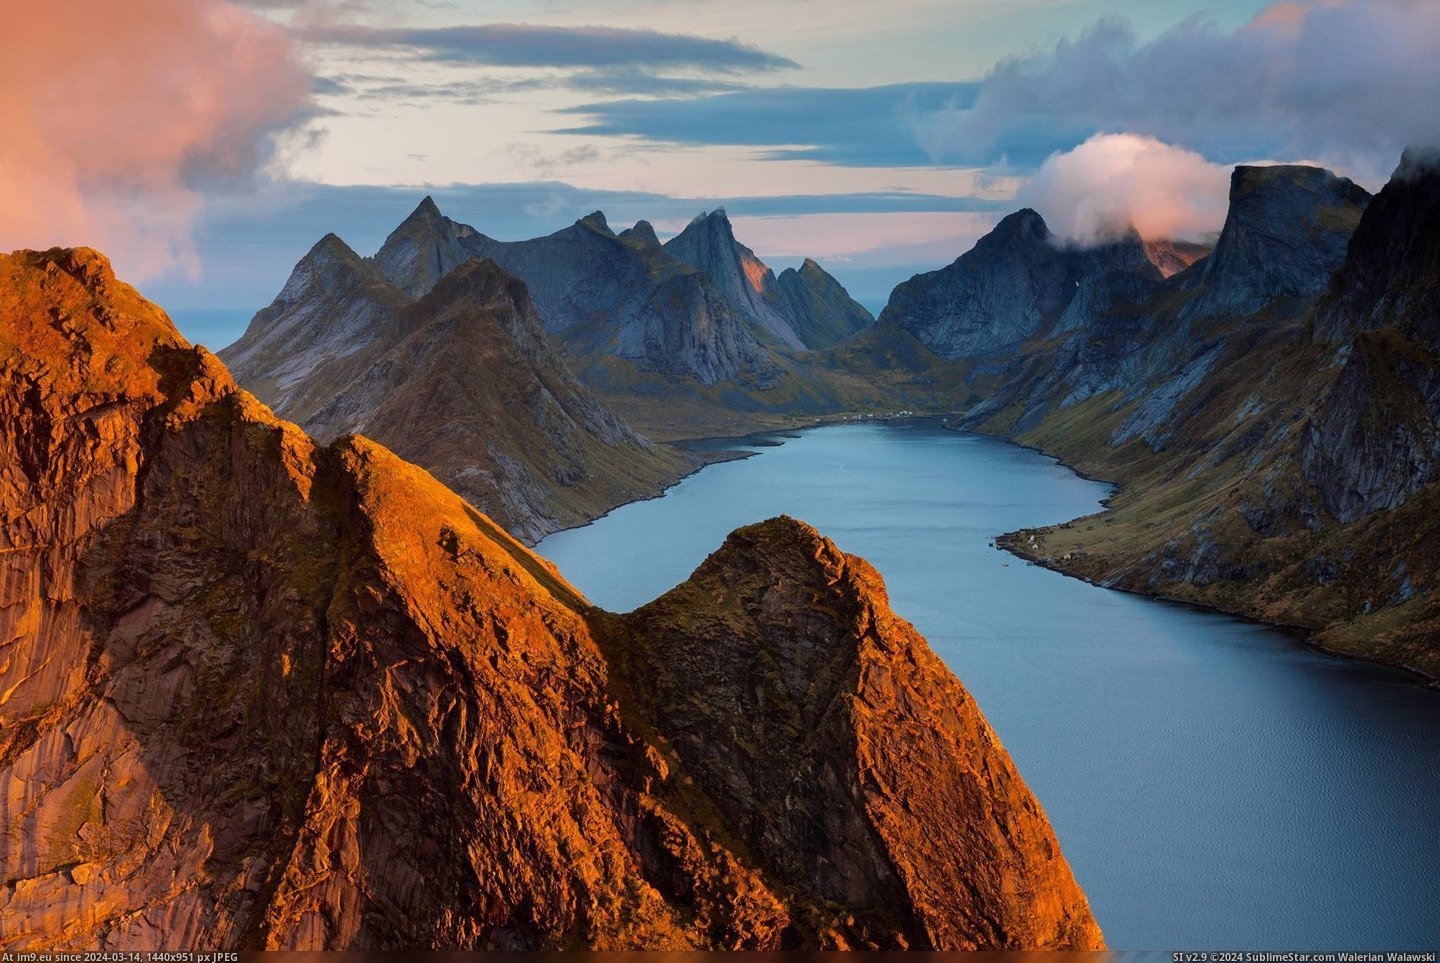 #Photo #World #Islands #2048x1365 #Lofoten #Top #Norway [Earthporn] 'Top of the World' - Lofoten Islands, Norway [2048x1365] Photo by Orsolya Haarberg Pic. (Image of album My r/EARTHPORN favs))